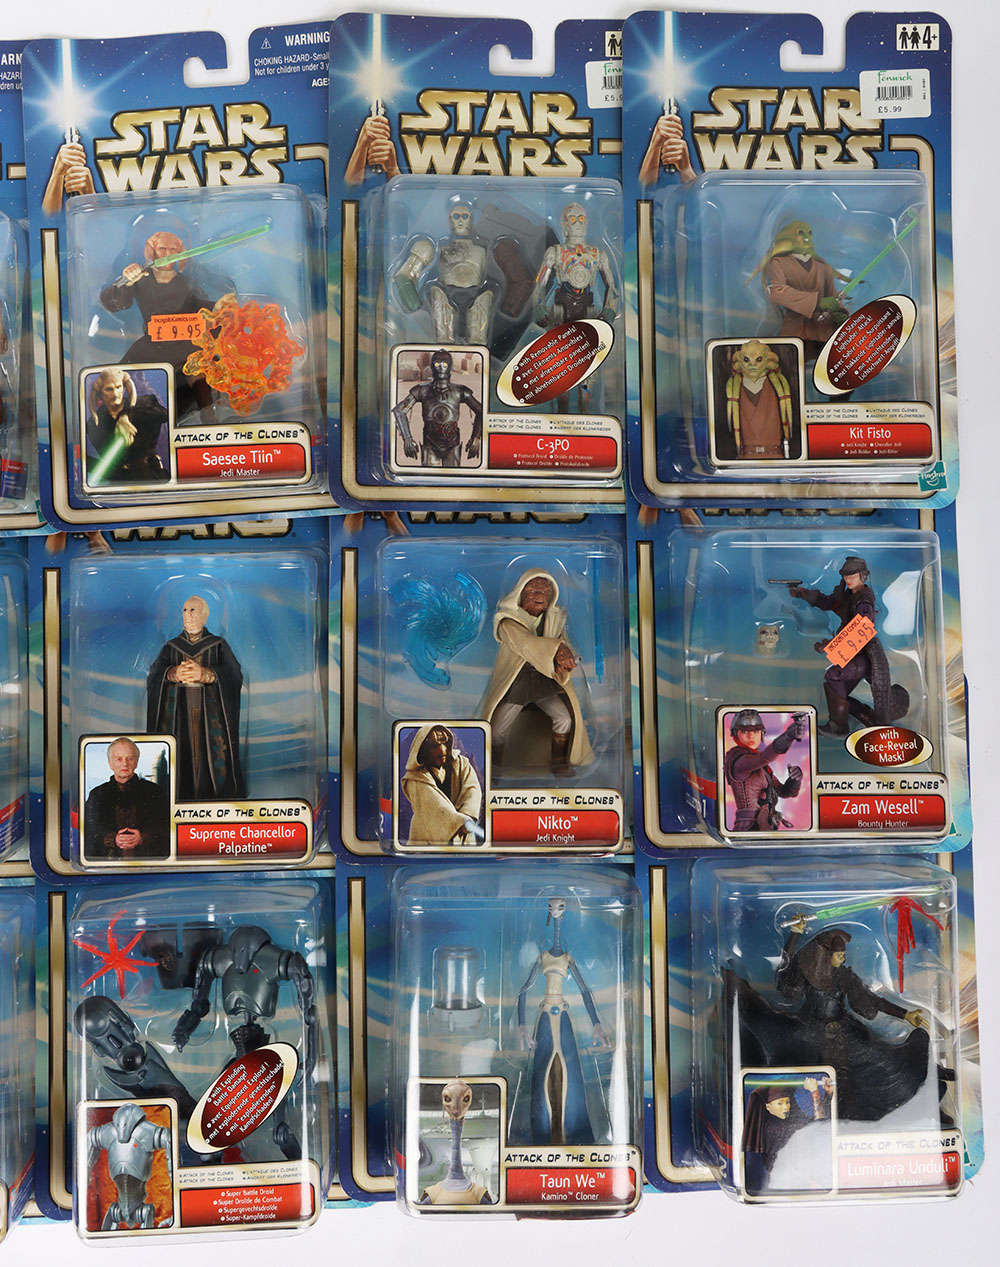 Hasbro Star Wars Carded Action Figures - Image 3 of 3